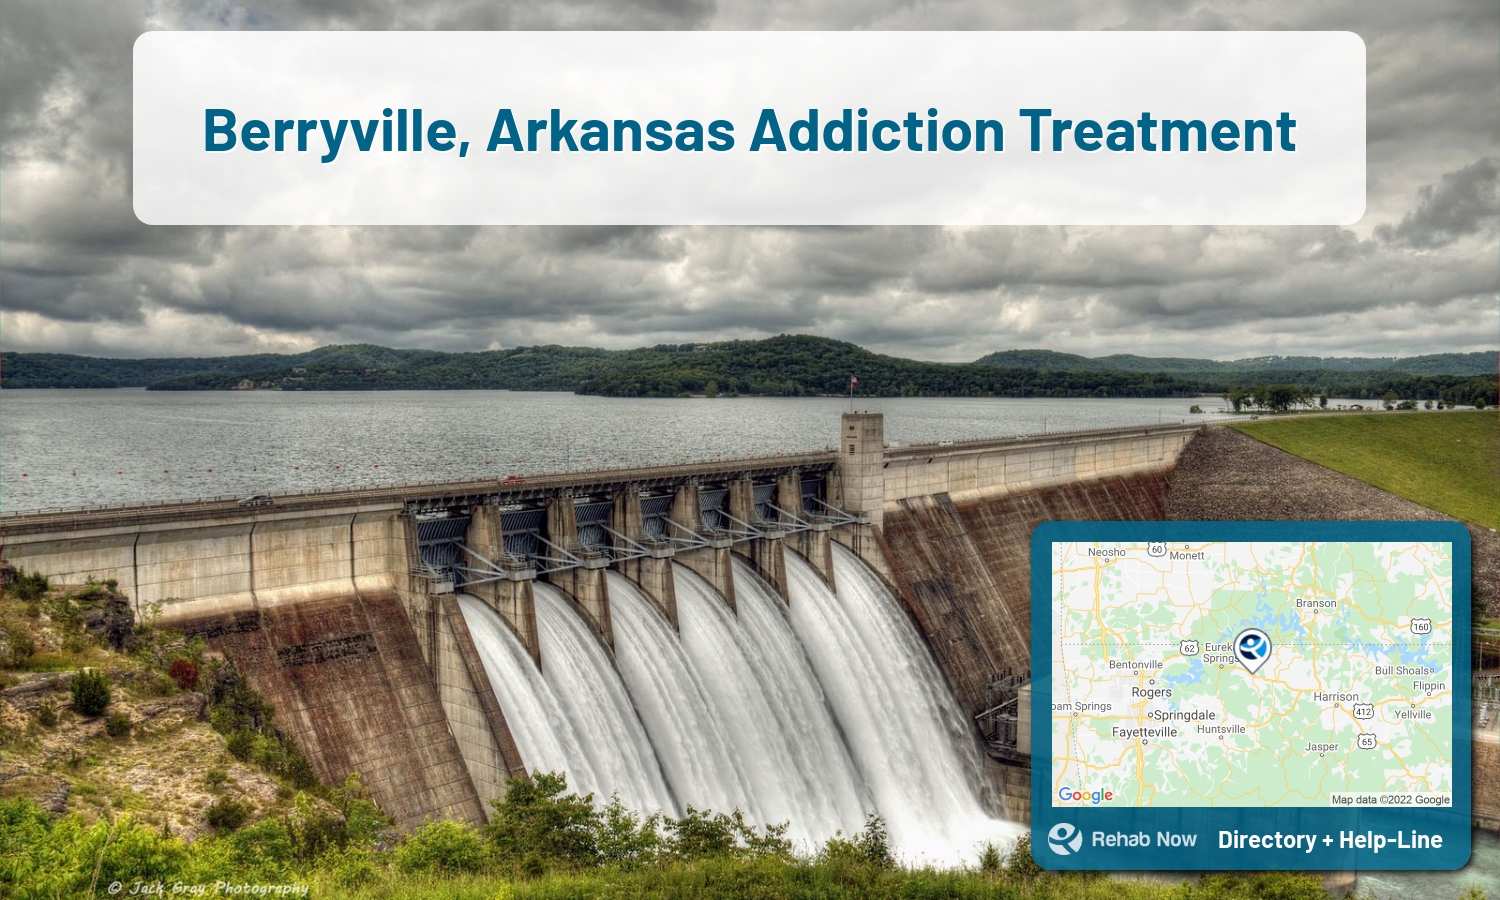 Drug rehab and alcohol treatment services nearby Berryville, AR. Need help choosing a treatment program? Call our free hotline!